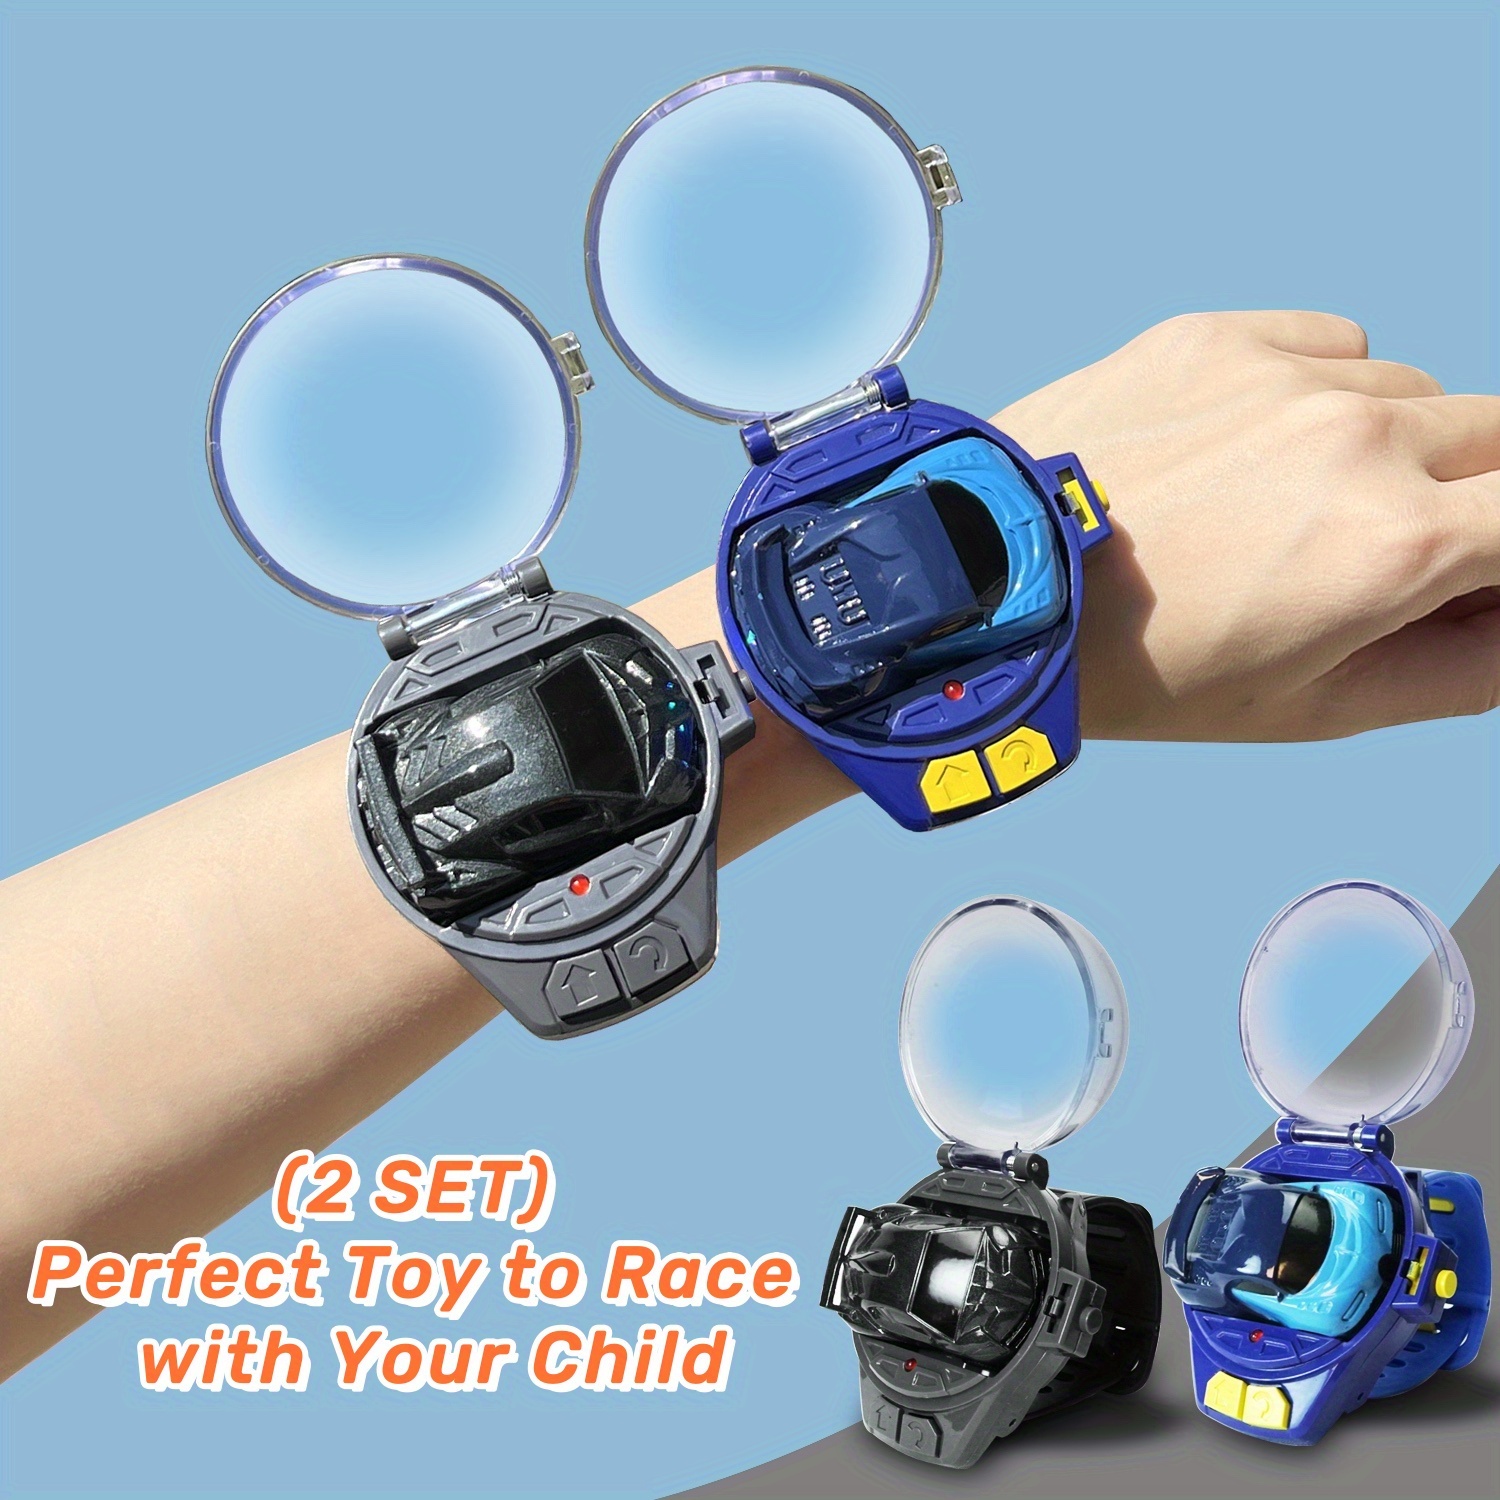 

(2 Pcs) Mini Remote Control Car Watch Toys, Small Rc Watch Racing Car With Usb Charging, 2.4 Ghz Detachable Small Watch Car Toy For Boys Girls Birthday Gift Christmas Gift